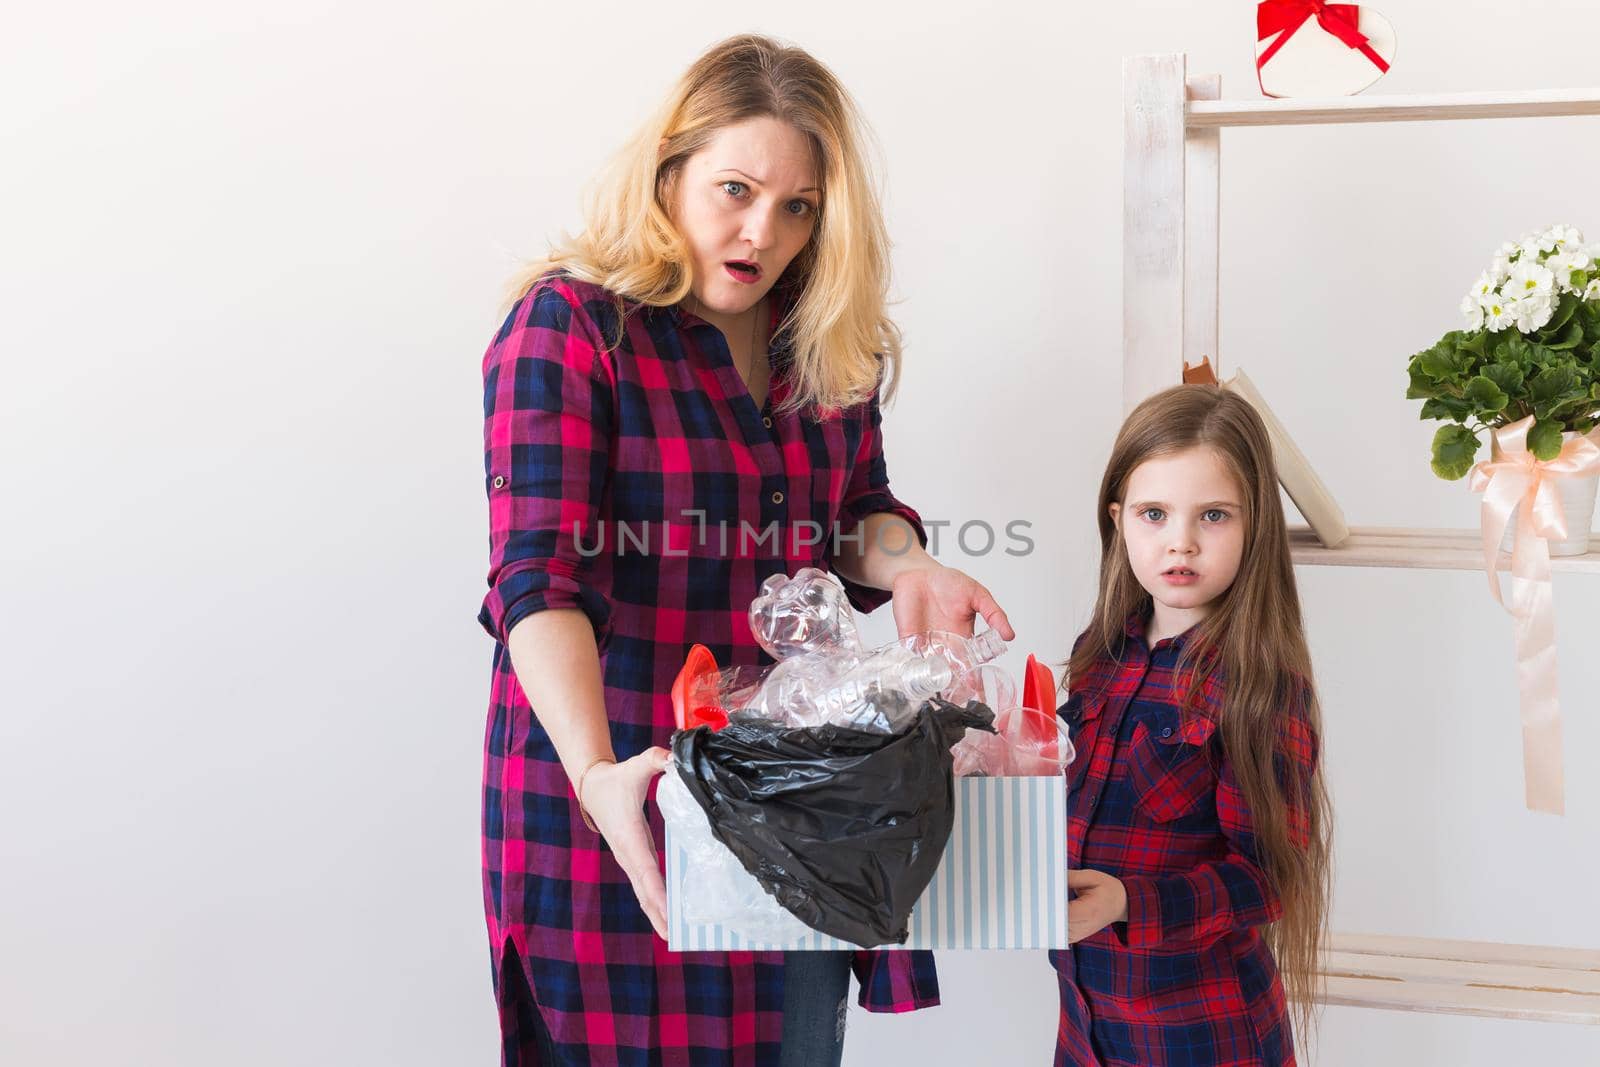 Shocked woman looks with opened eyes and worried expression, holding box with various plastic wastes and trash